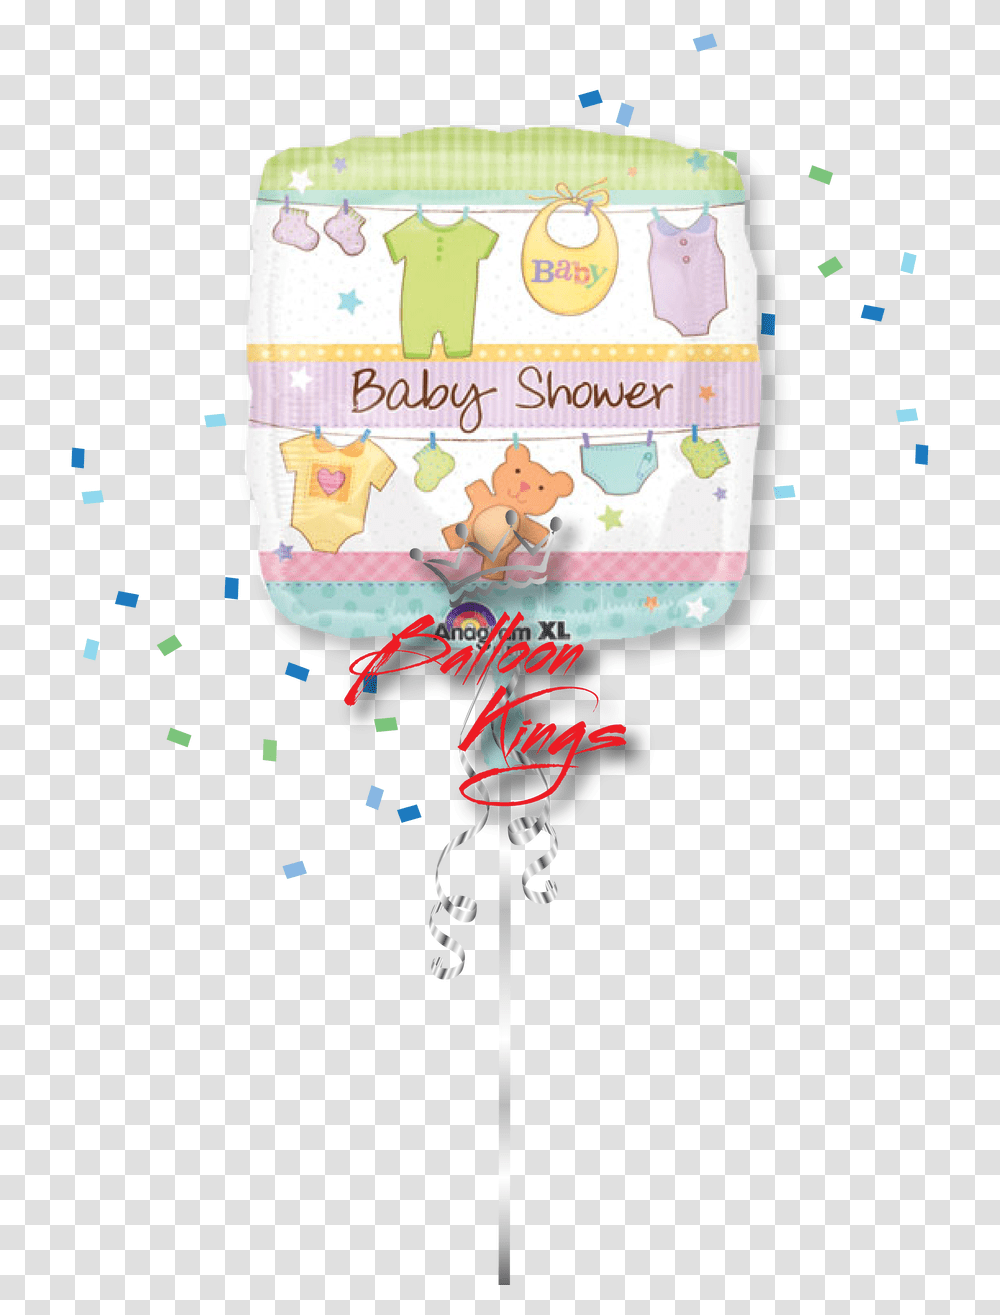 Baby Shower Cuddly Clothesline 1st Birthday Balloon, Paper, Poster, Advertisement, Furniture Transparent Png